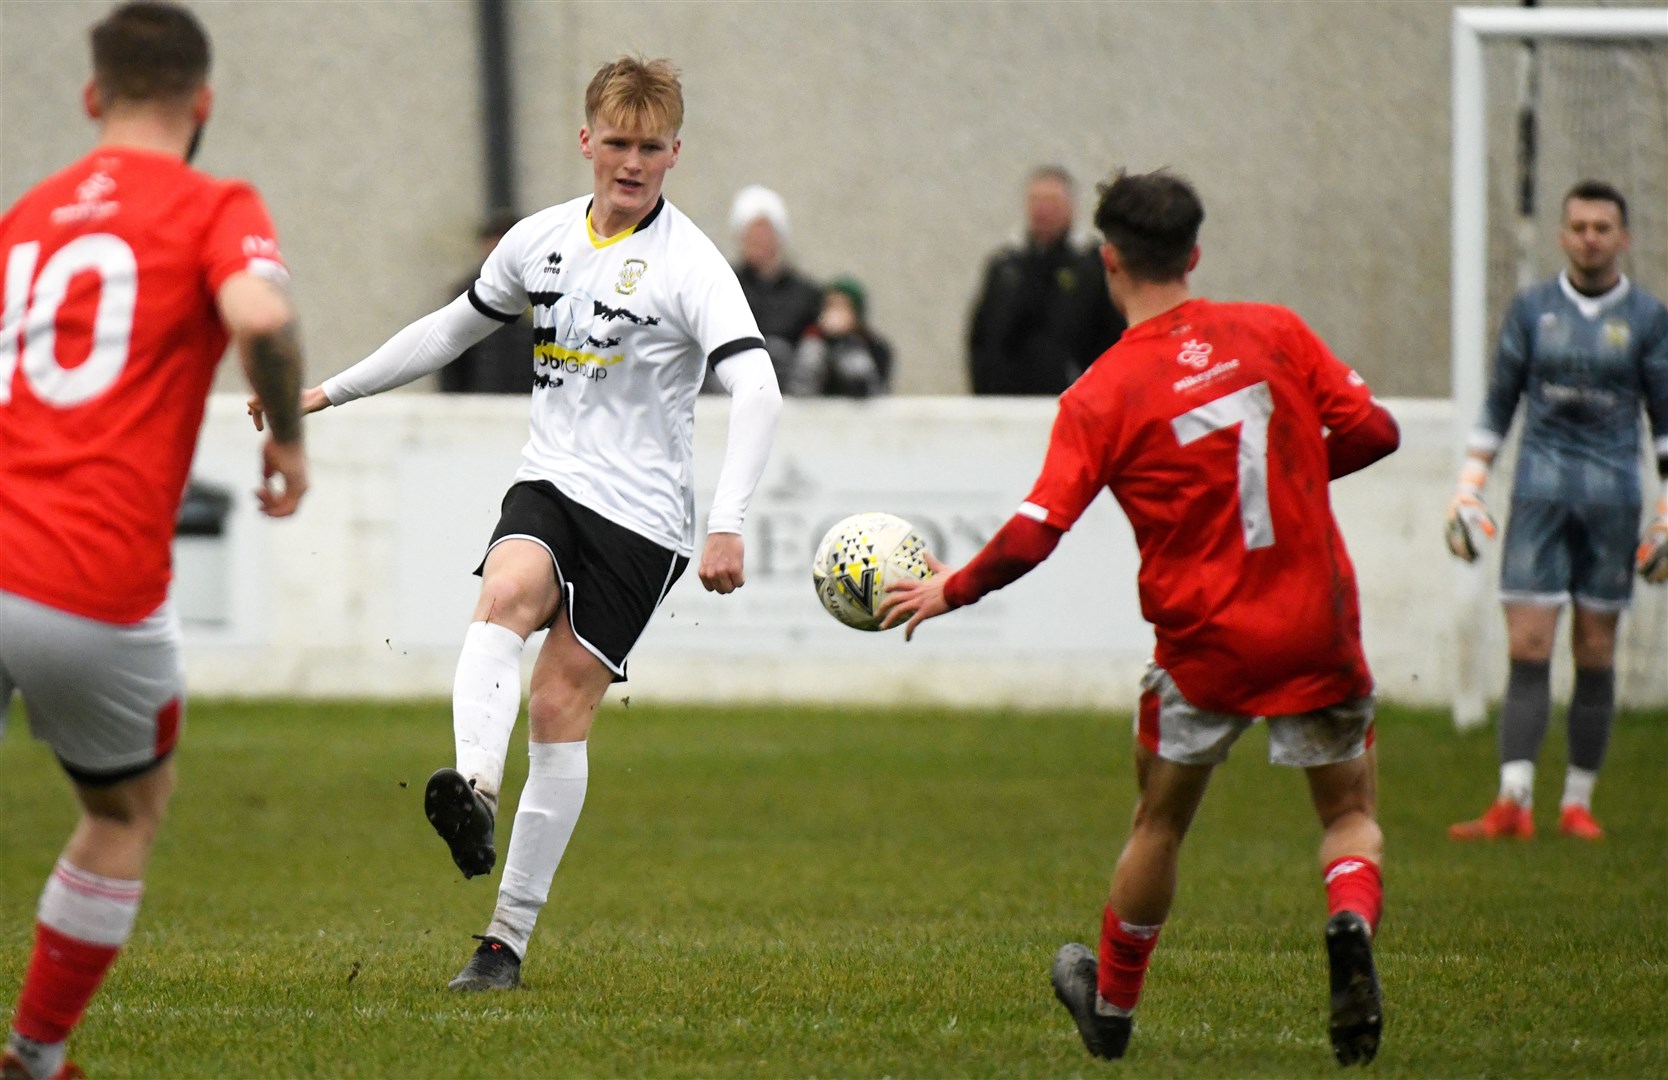 Andrew Macleod played against Nairn last season too in his time with Clachnacuddin. Picture: James Mackenzie